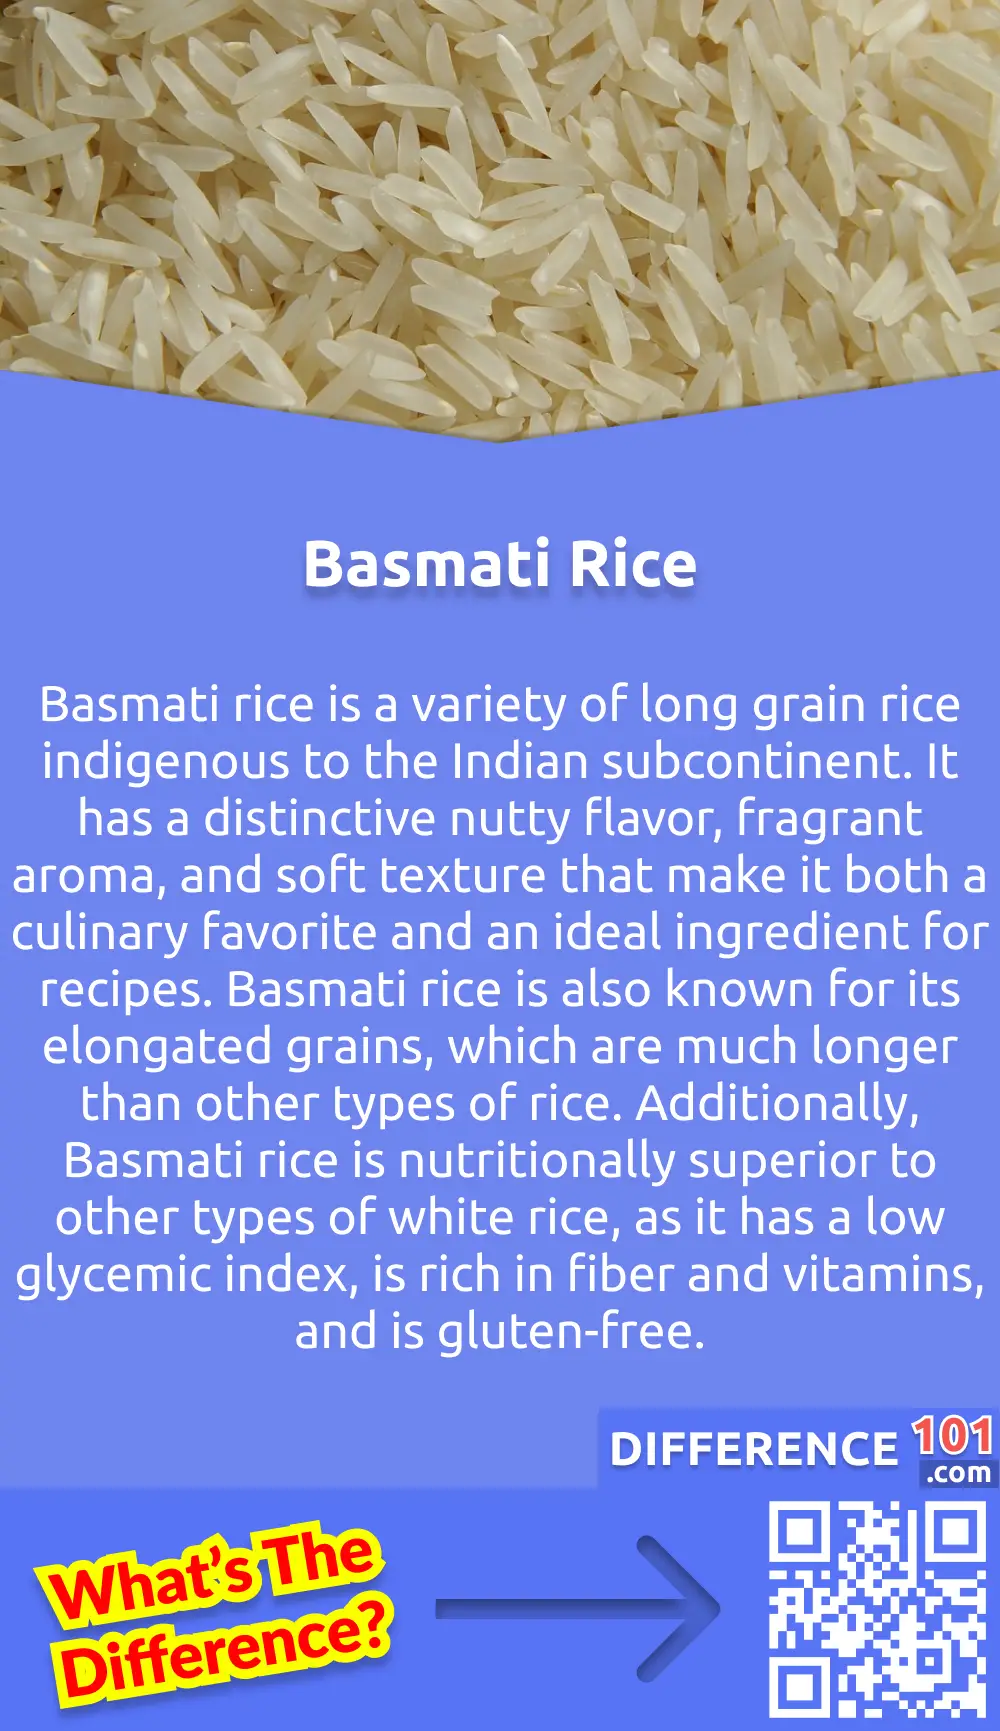 What Is Basmati Rice? Basmati rice is a variety of long grain rice indigenous to the Indian subcontinent. It has a distinctive nutty flavor, fragrant aroma, and soft texture that make it both a culinary favorite and an ideal ingredient for recipes. Basmati rice is also known for its elongated grains, which are much longer than other types of rice. Additionally, Basmati rice is nutritionally superior to other types of white rice, as it has a low glycemic index, is rich in fiber and vitamins, and is gluten-free. Basmati rice is popularly used in Indian and Middle Eastern cuisines, and is often served as a side dish to accompany curries, dals, and other dishes. It is also used in dishes such as biryani and pulao, and can be easily cooked by boiling or steaming. 
